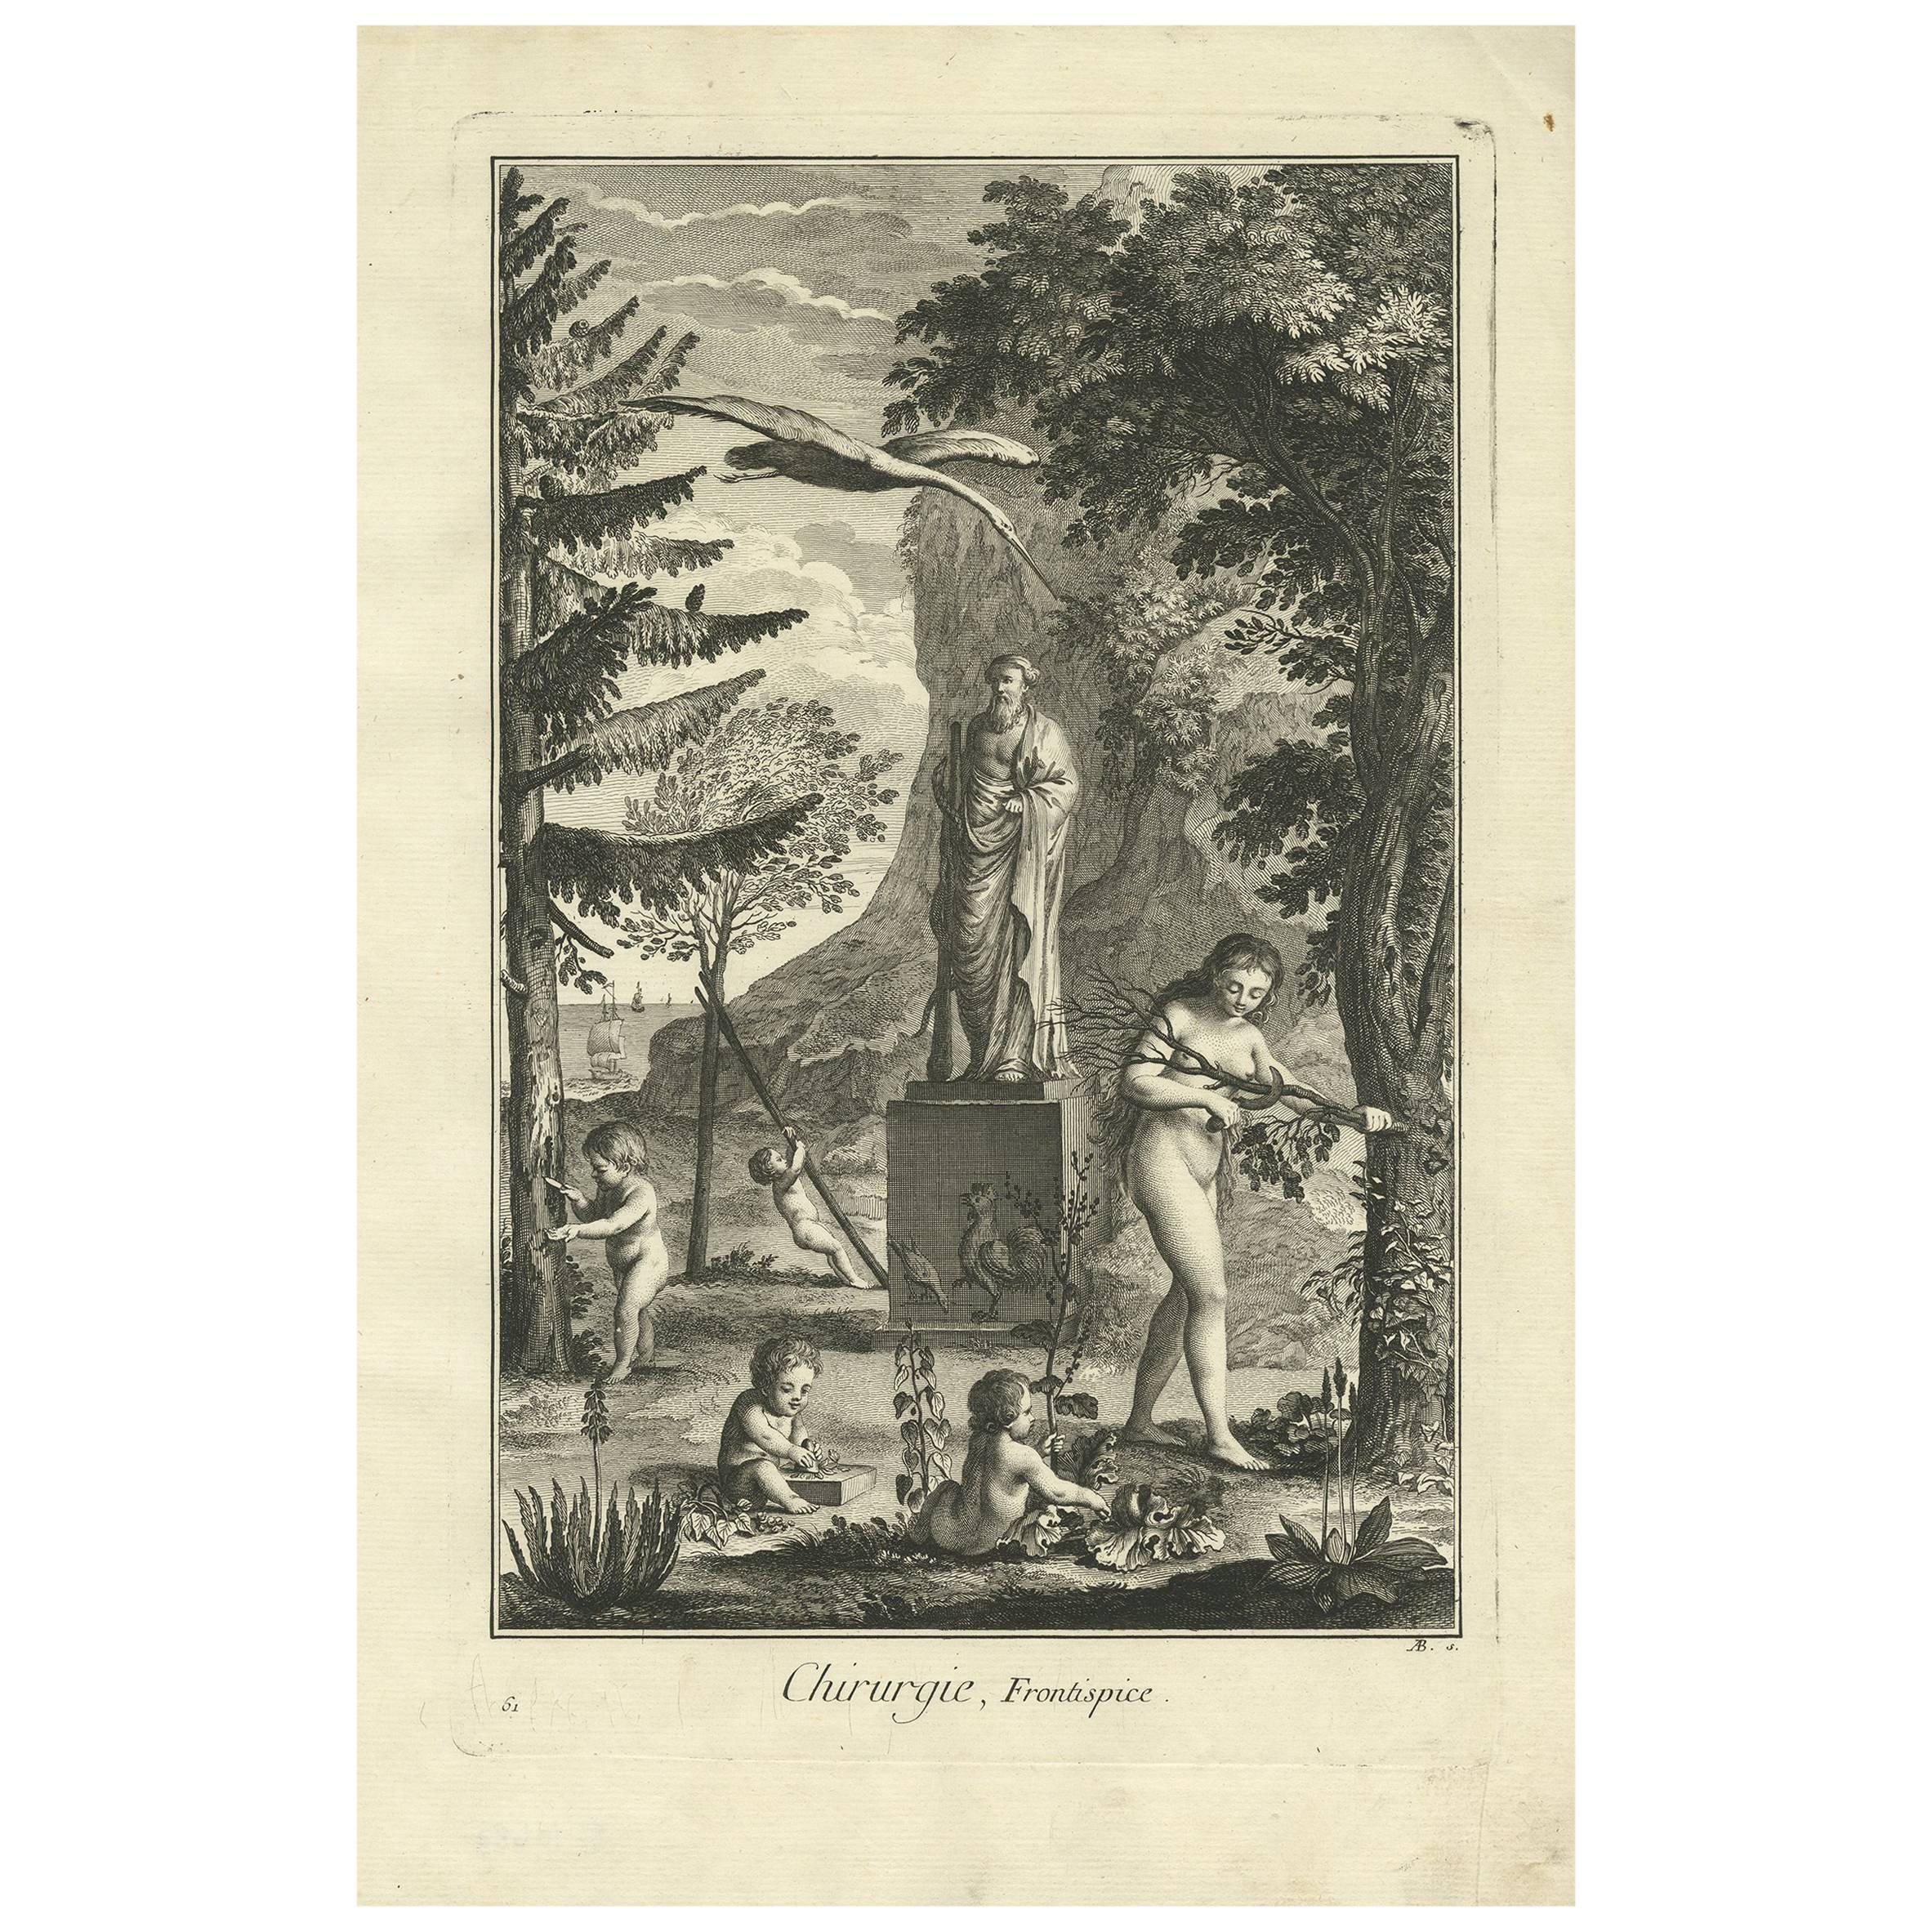 Antique Medical Print 'Frontispiece' by D. Diderot, circa 1760